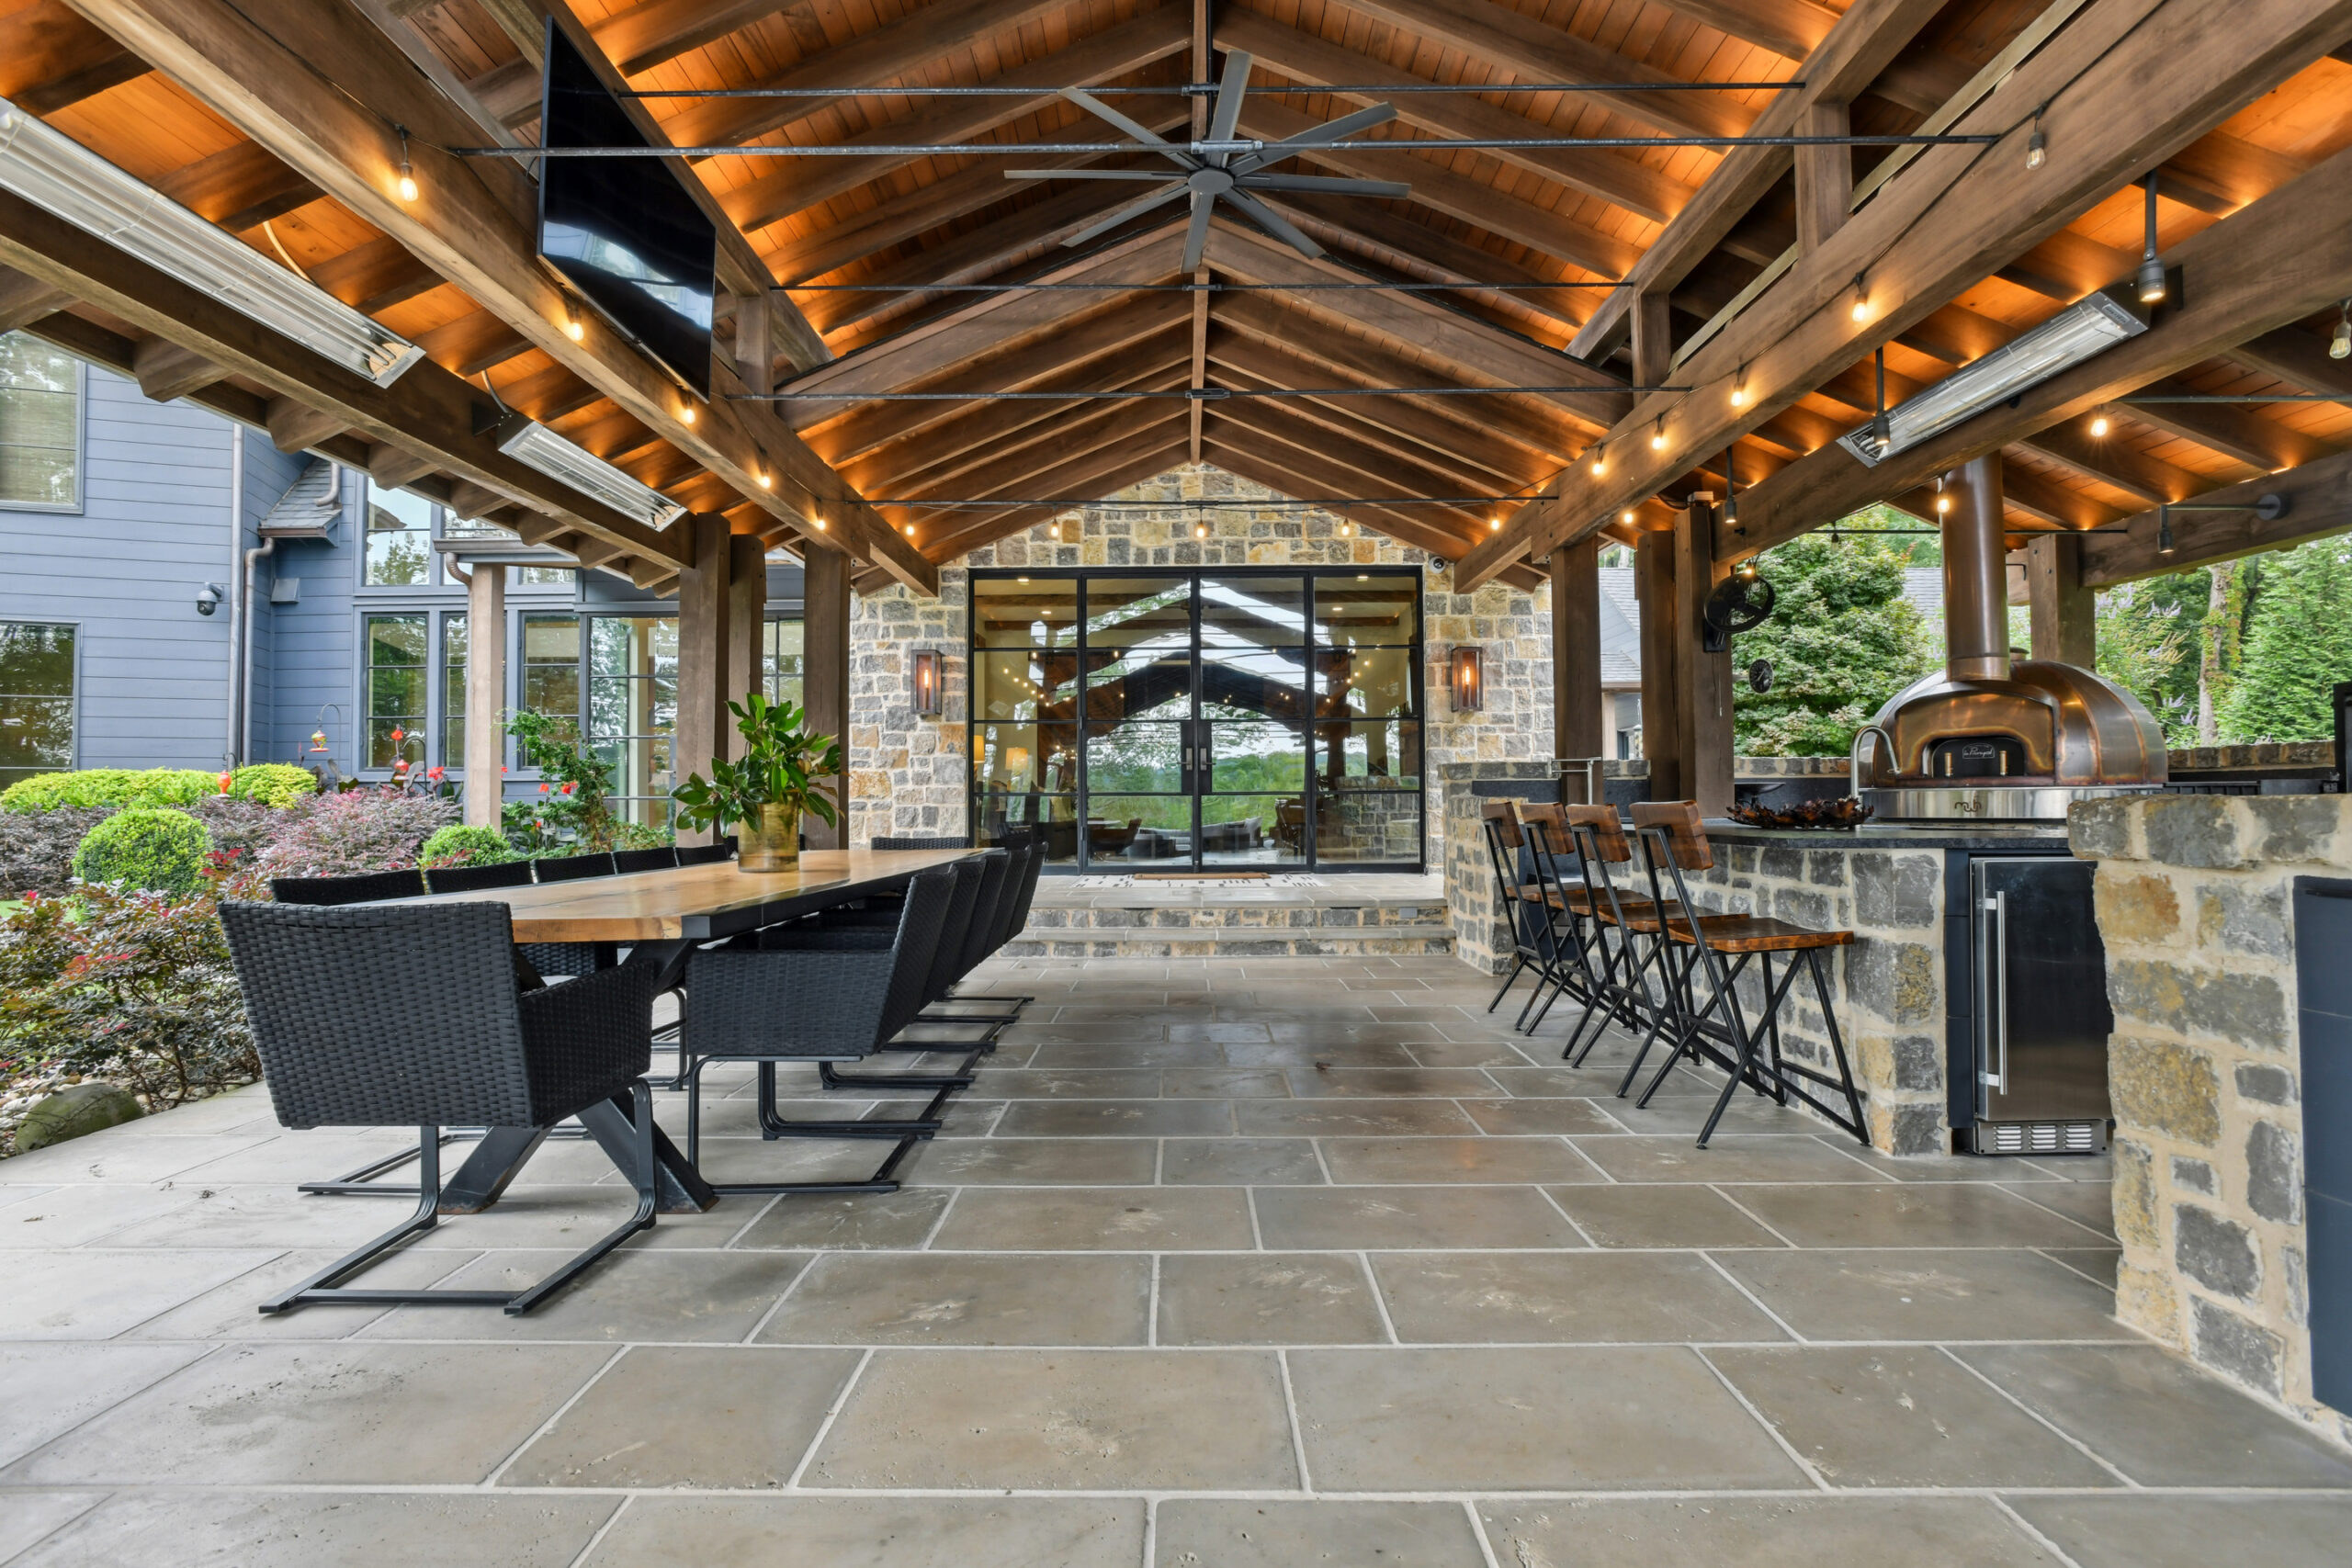 Outdoor kitchen and dining space